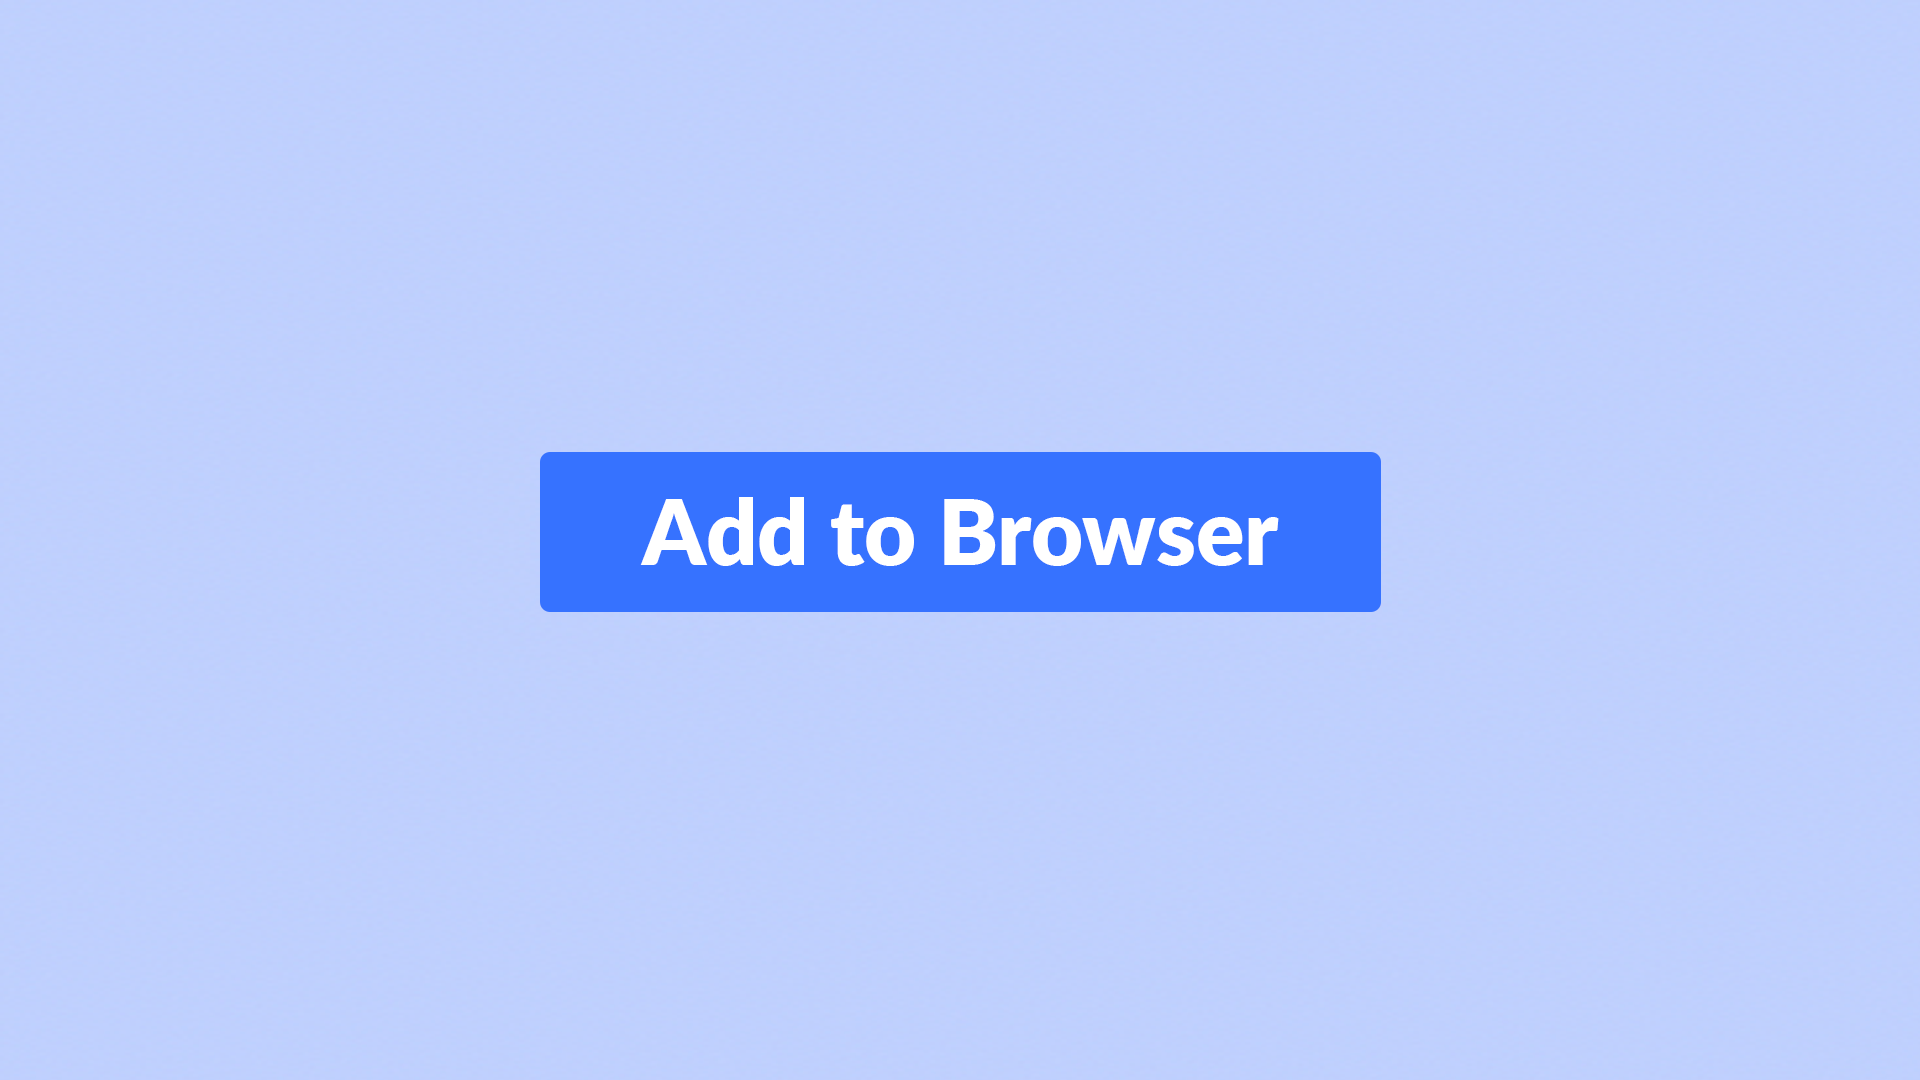 Add to Browser